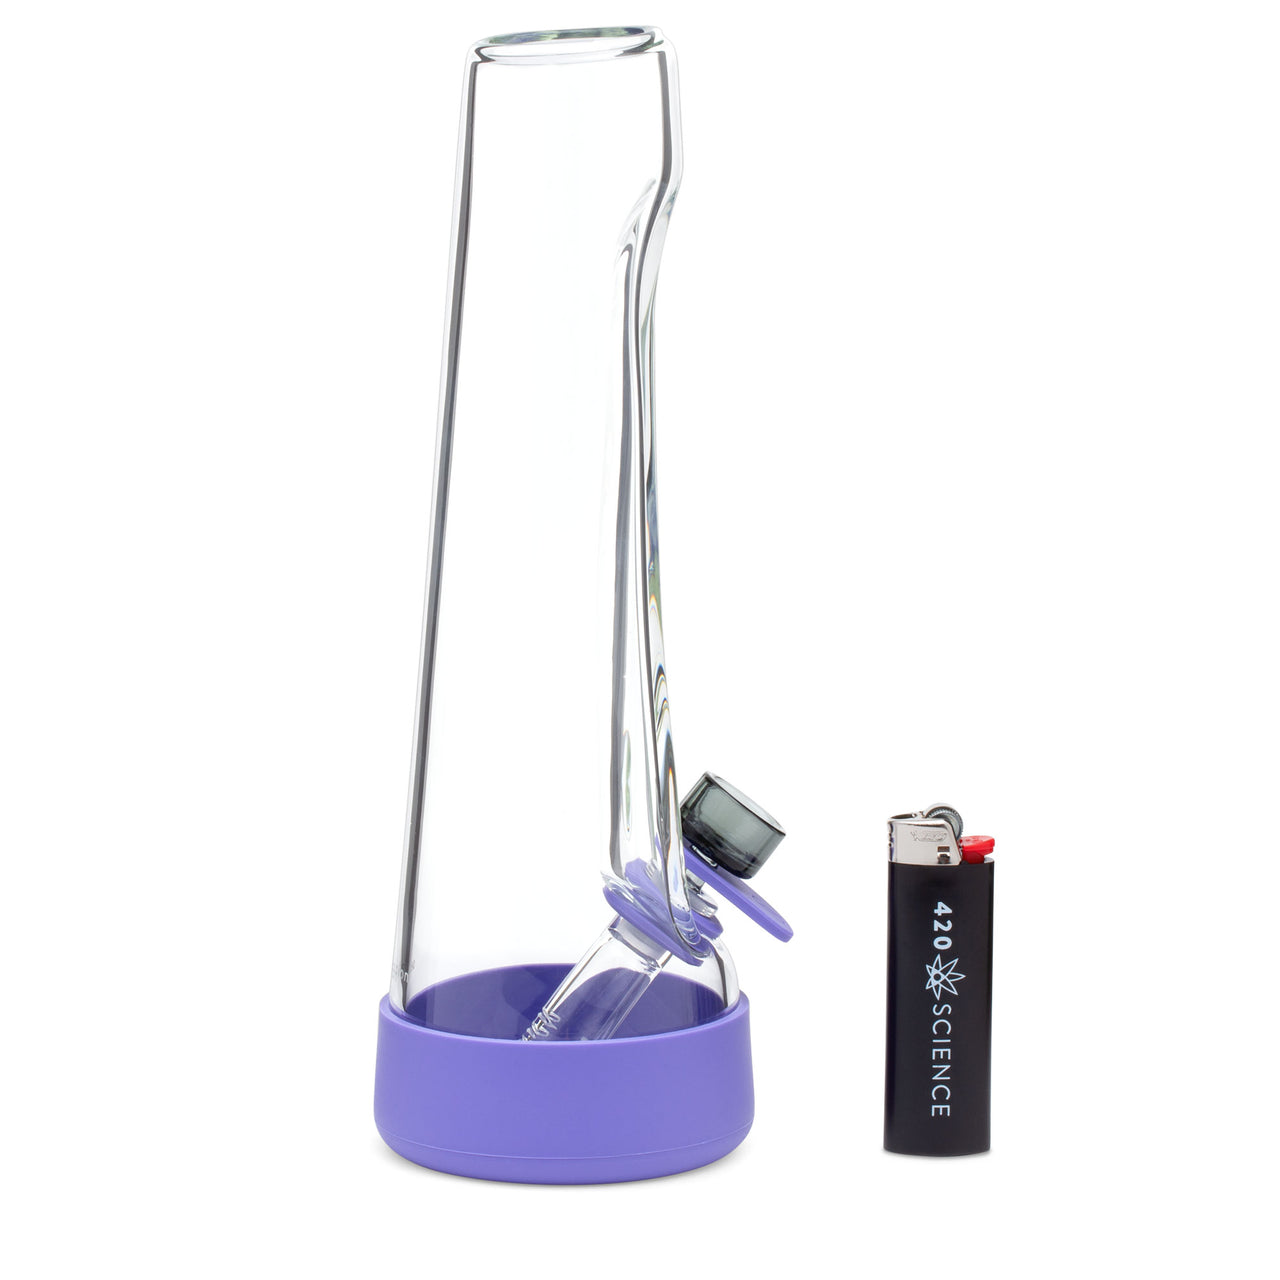 Home Blown Glass Road Straw Air-Cooled Dry Rig / $ 24.99 at 420 Science